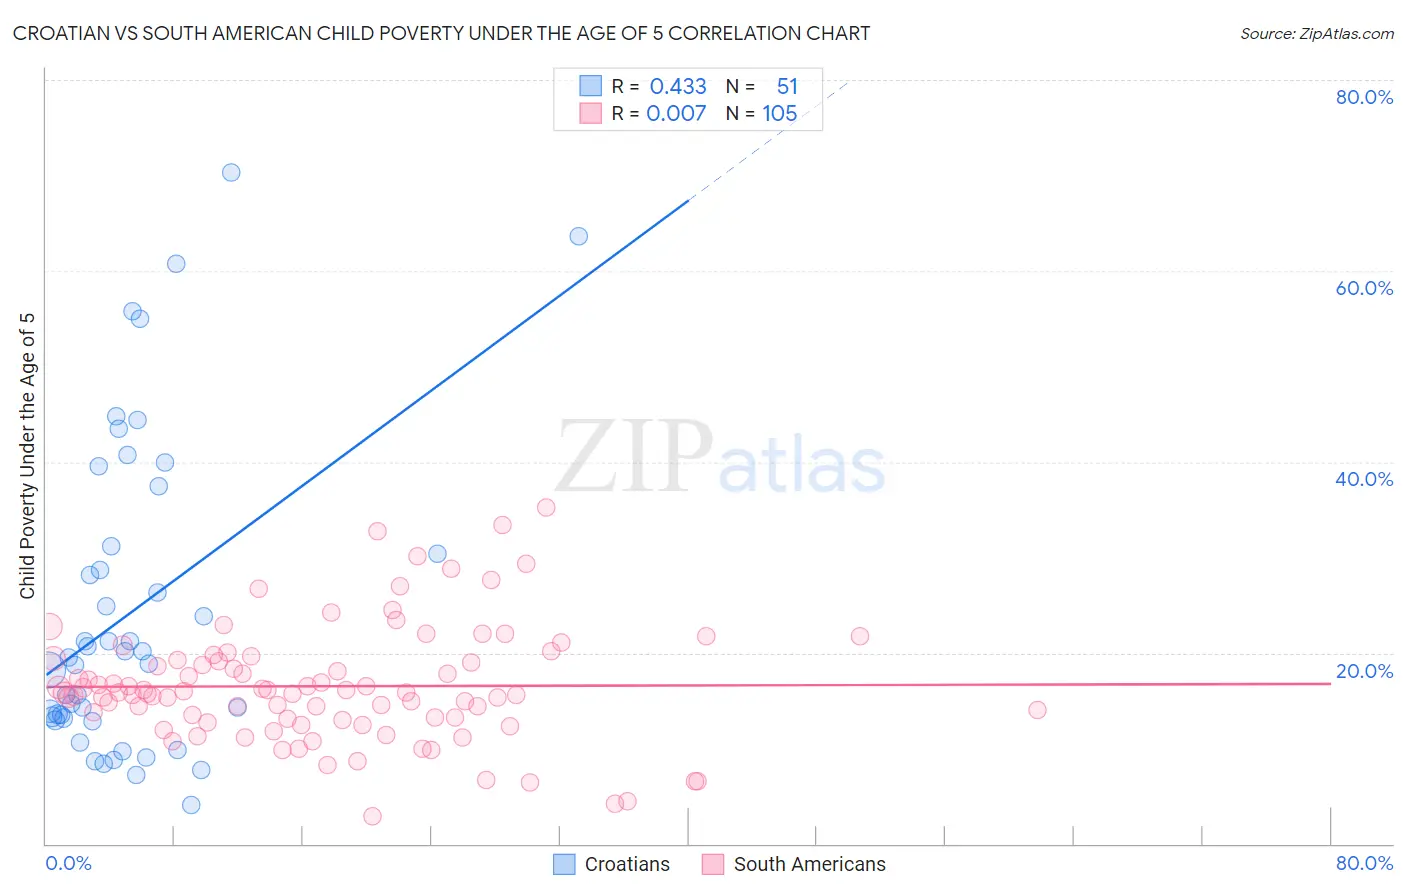 Croatian vs South American Child Poverty Under the Age of 5